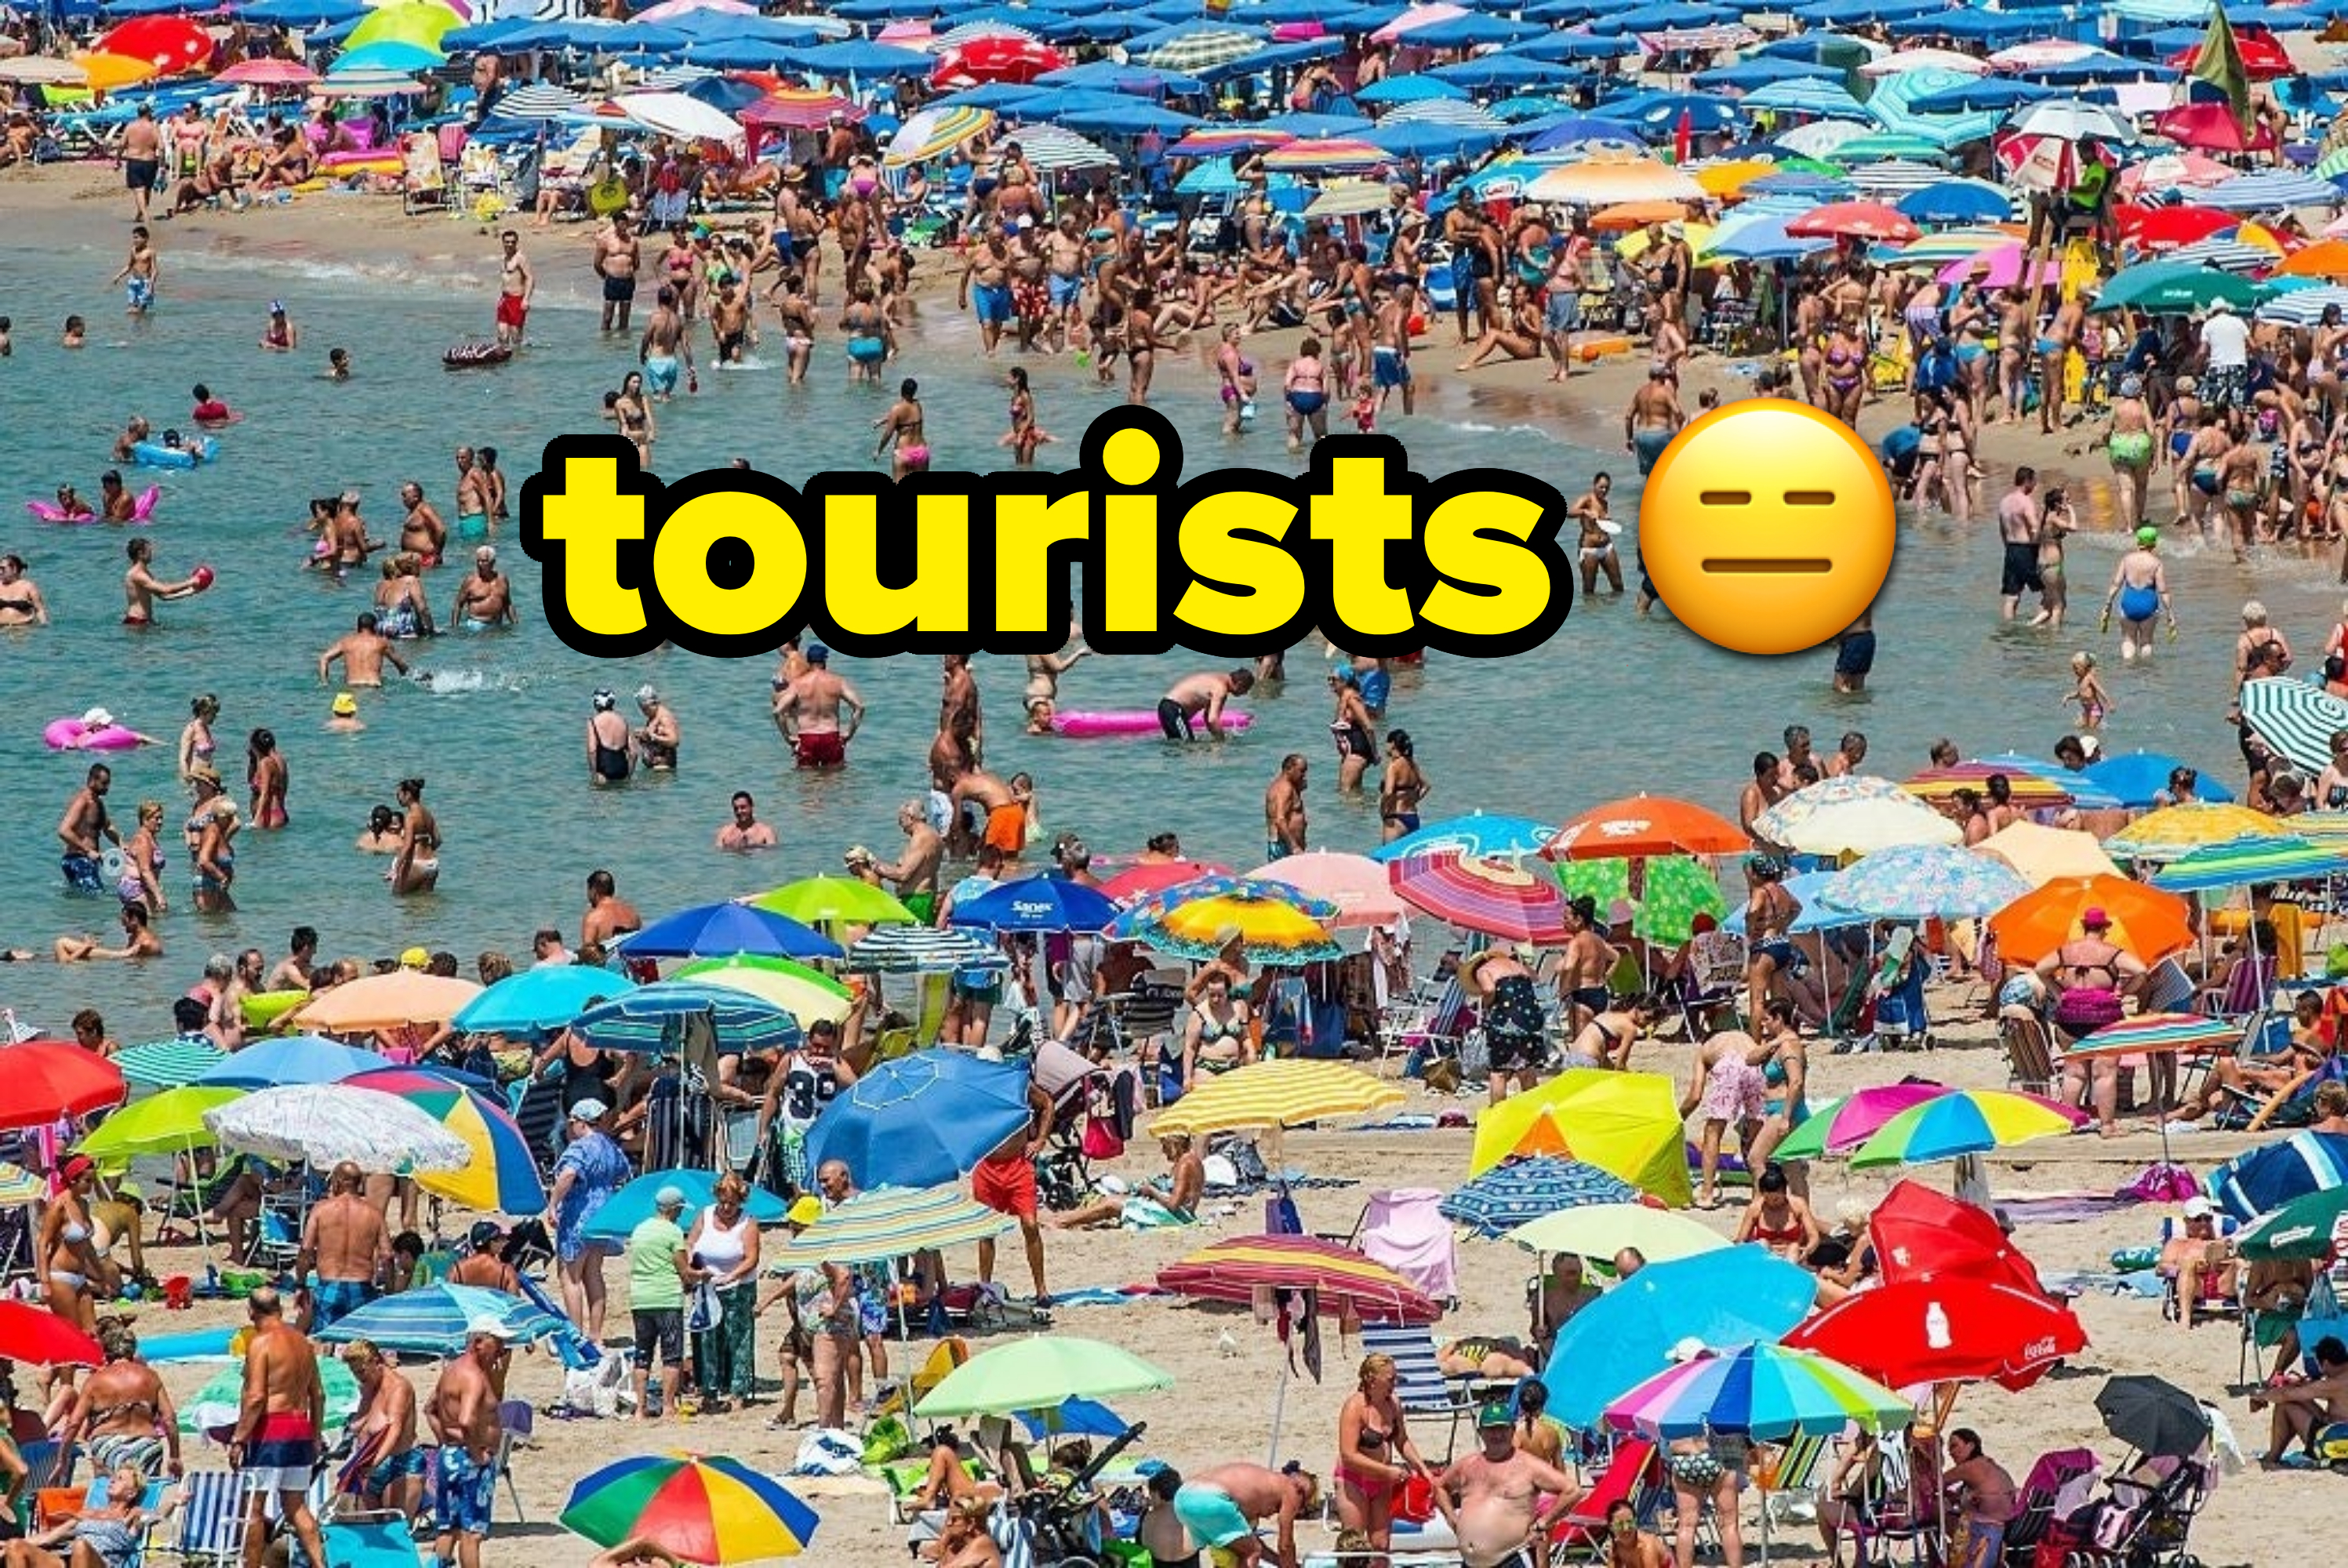 crowded beach with the word tourists